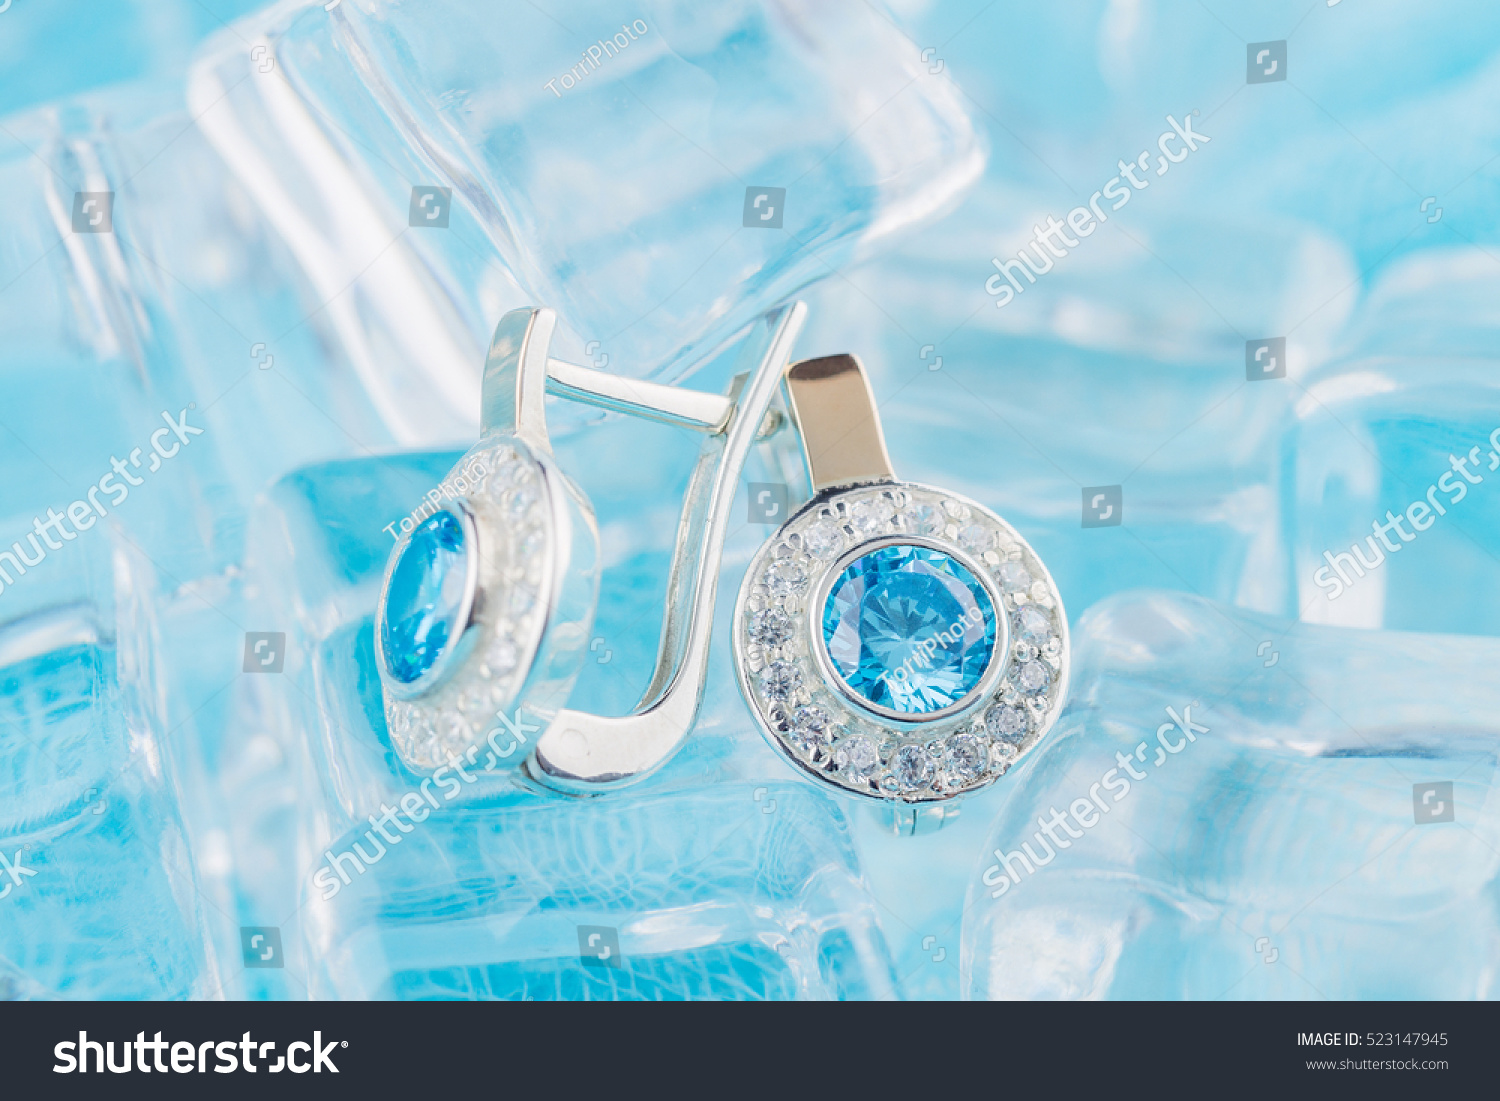 https://www.shutterstock.com/pic-523147945/stock-photo-close-up-earrings-with-zircon-and-expensive-blue-gemstones-still-life-on-ice-blue-background.html